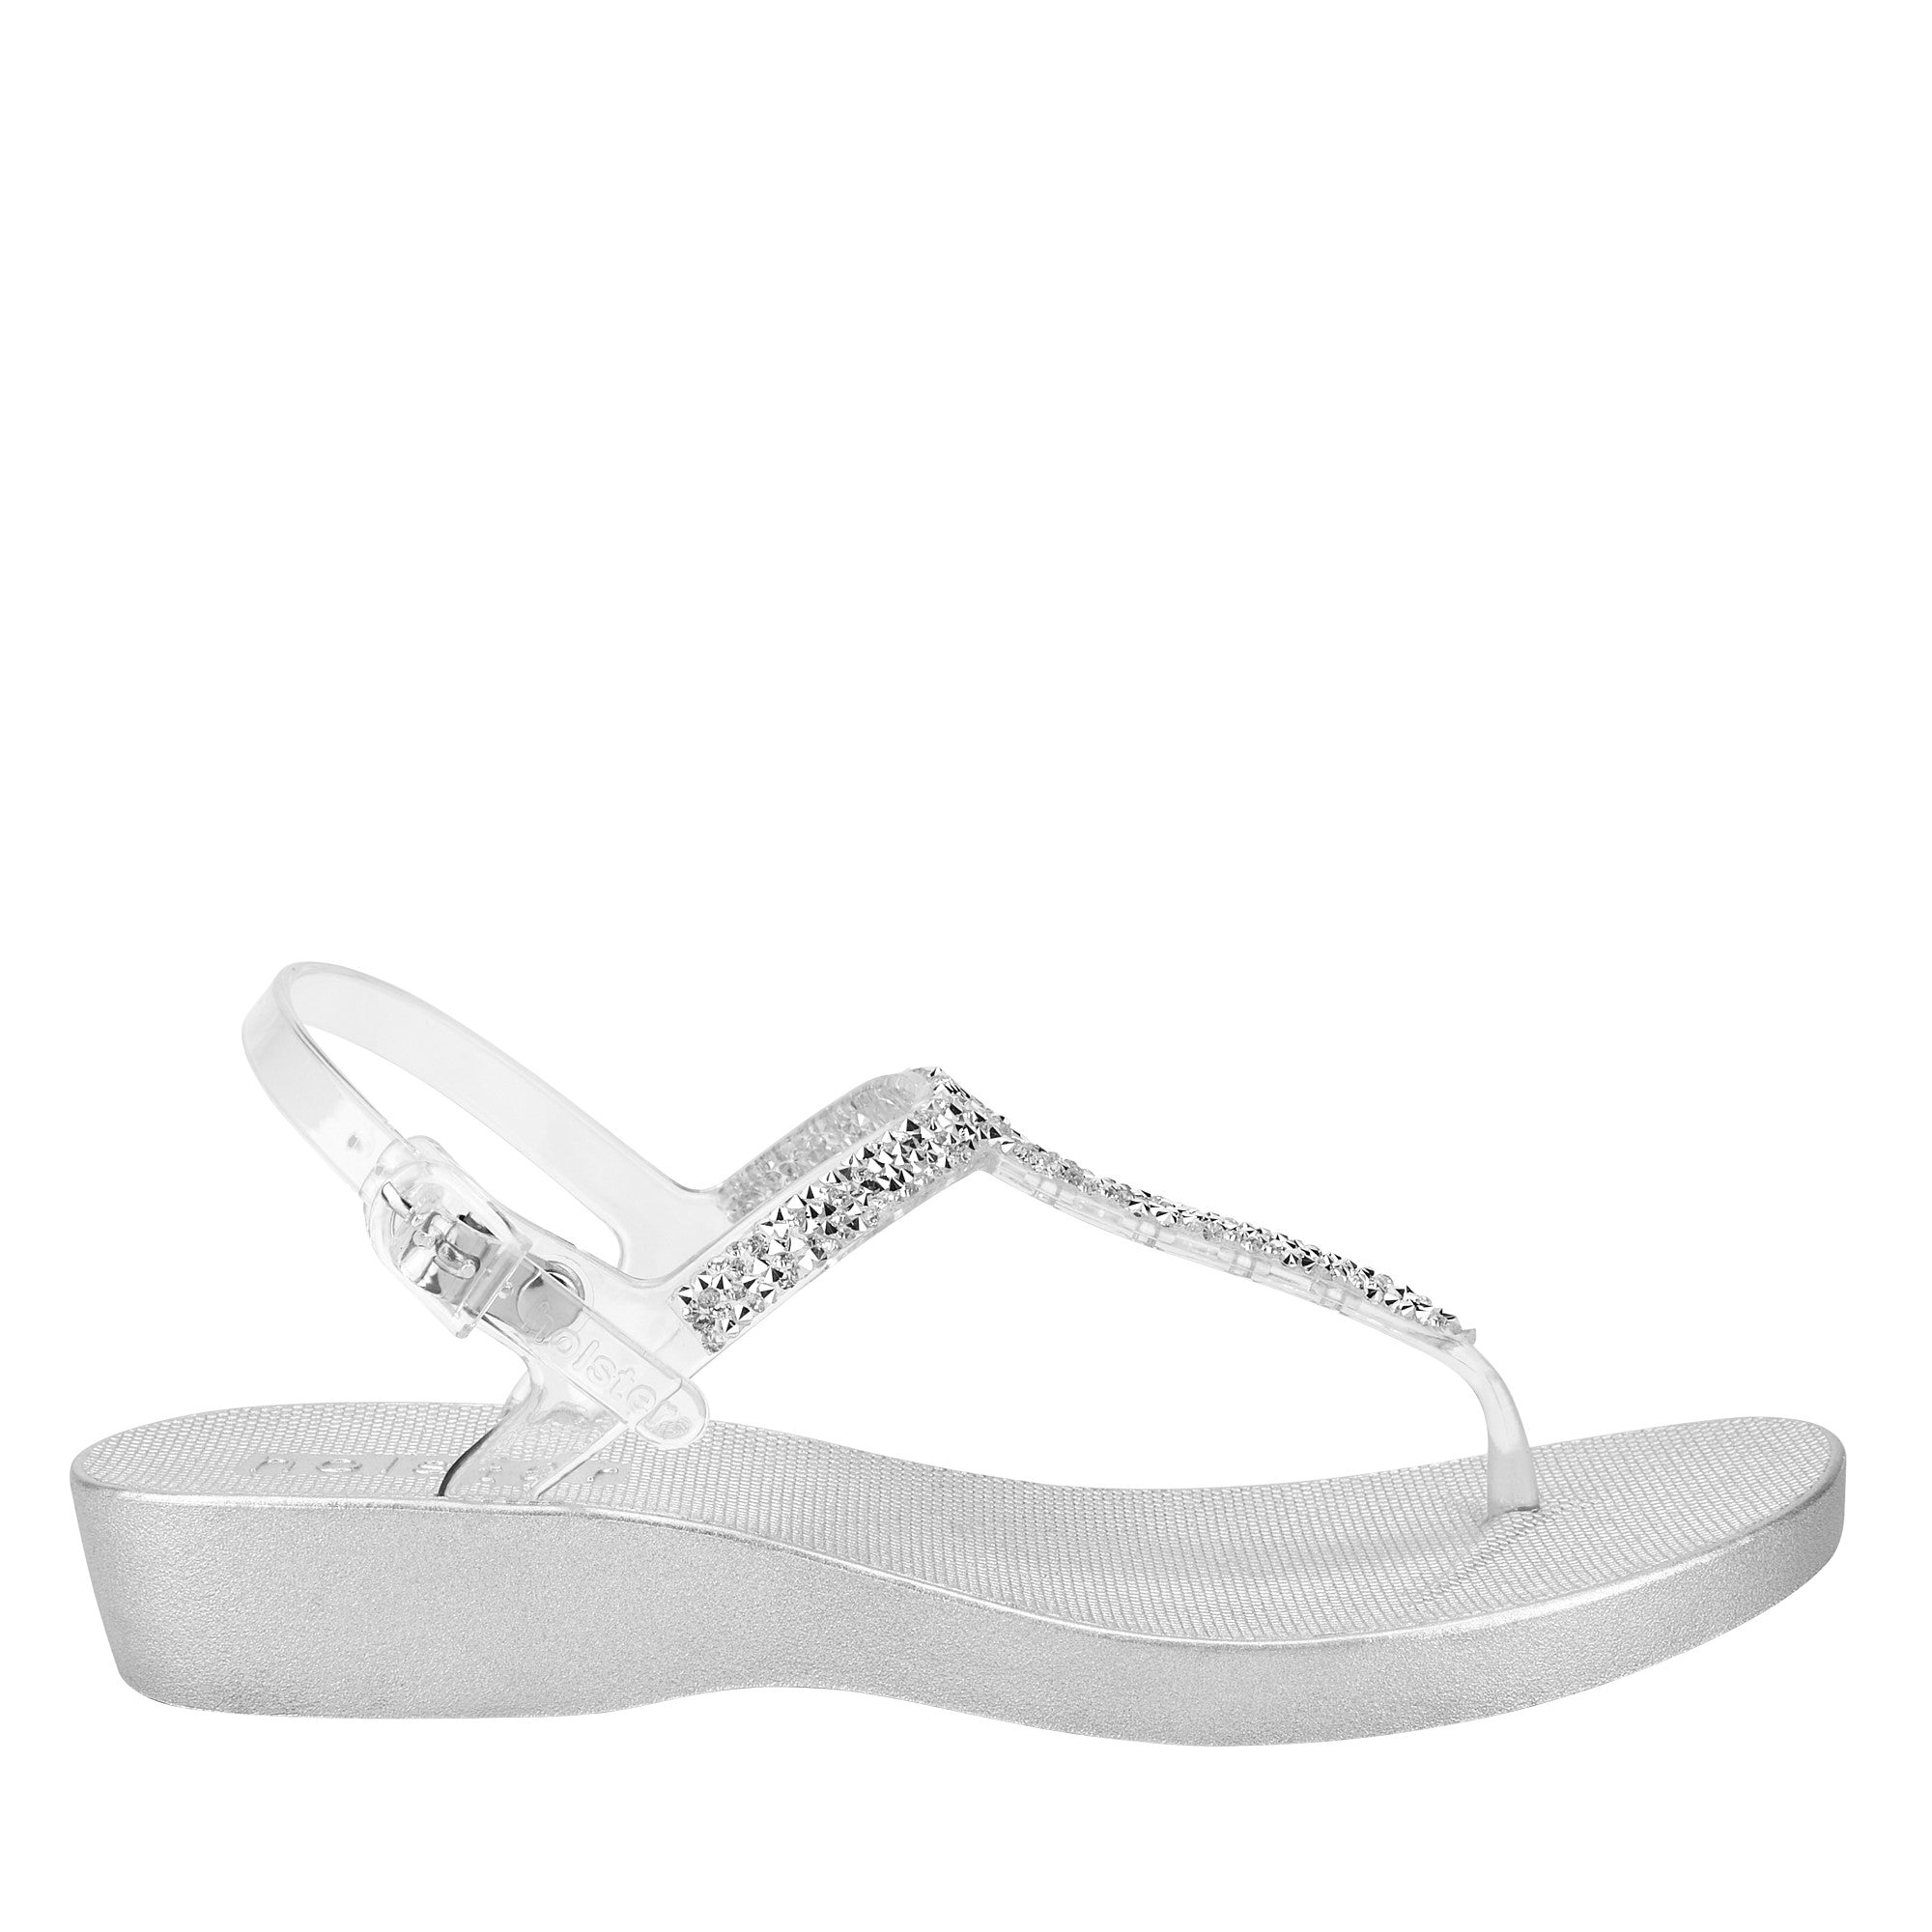 Holster Holster Riviera Wedge Sandal Clear 4 